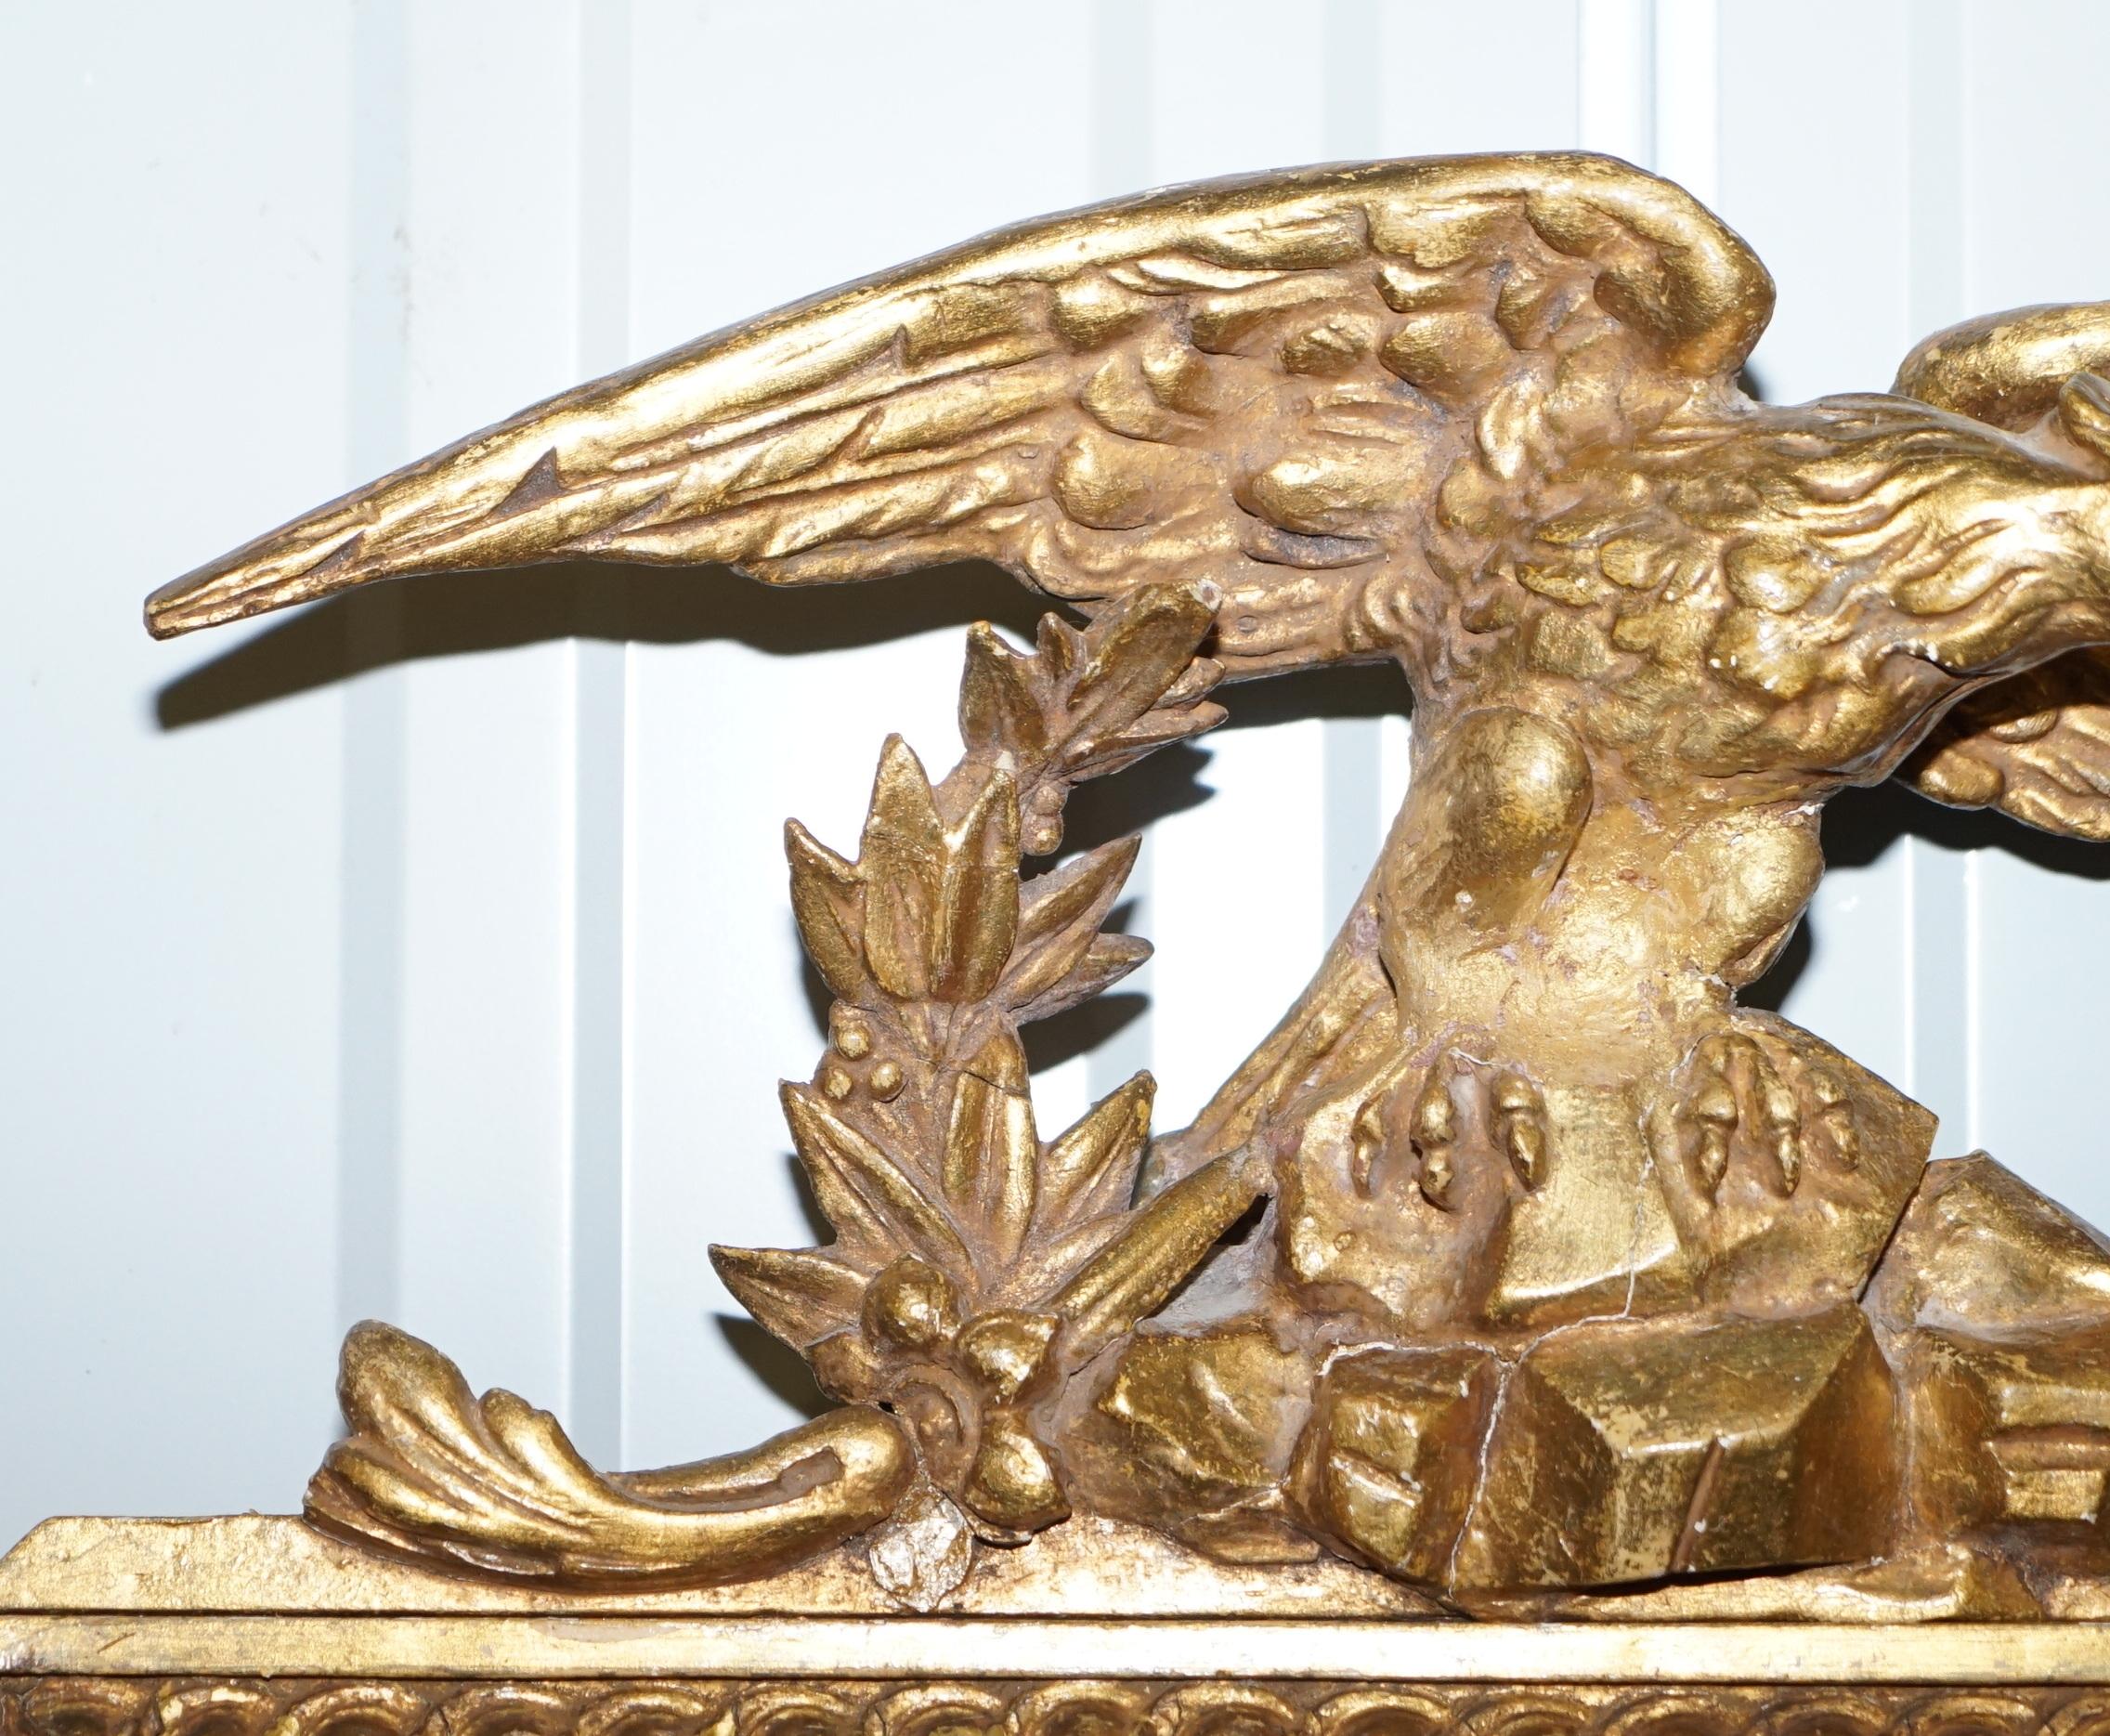 English Exquisite Regency Circa 1810-1820 Gilded Gesso Mirror Hand Carved Large Eagle For Sale